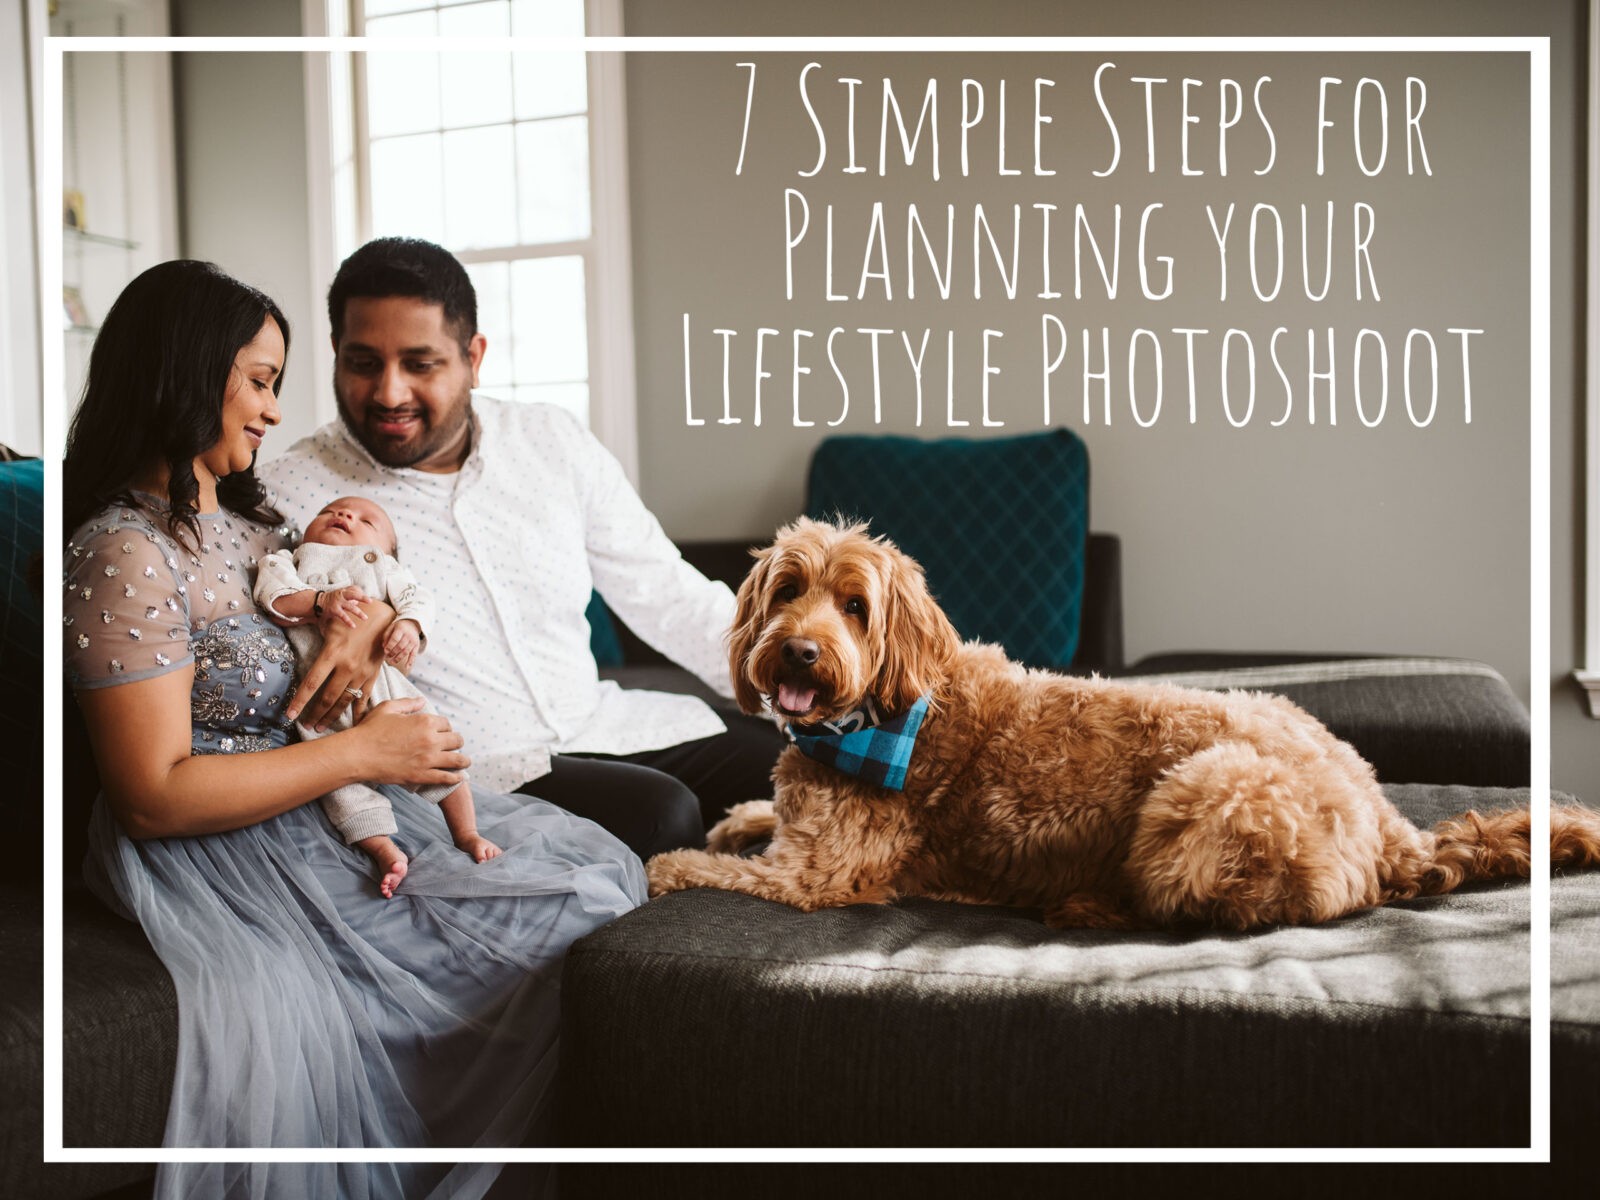 You are currently viewing 7 Simple Steps for Planning your Lifestyle Photoshoot